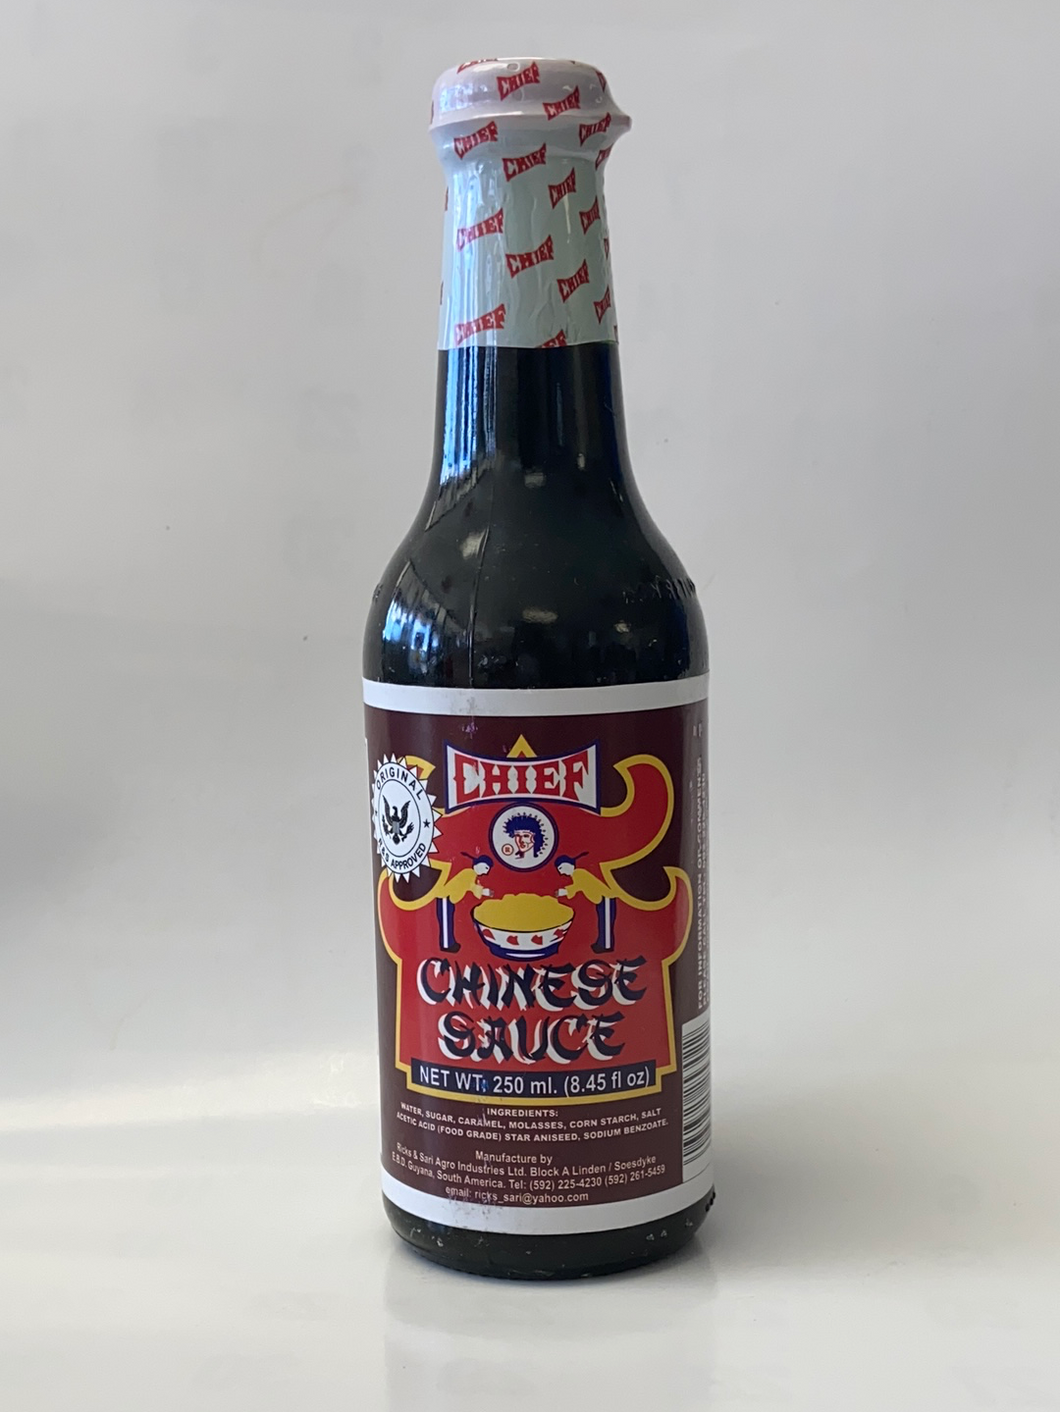 Chinese Sauce, 8.5 or 10.5 oz, Chief